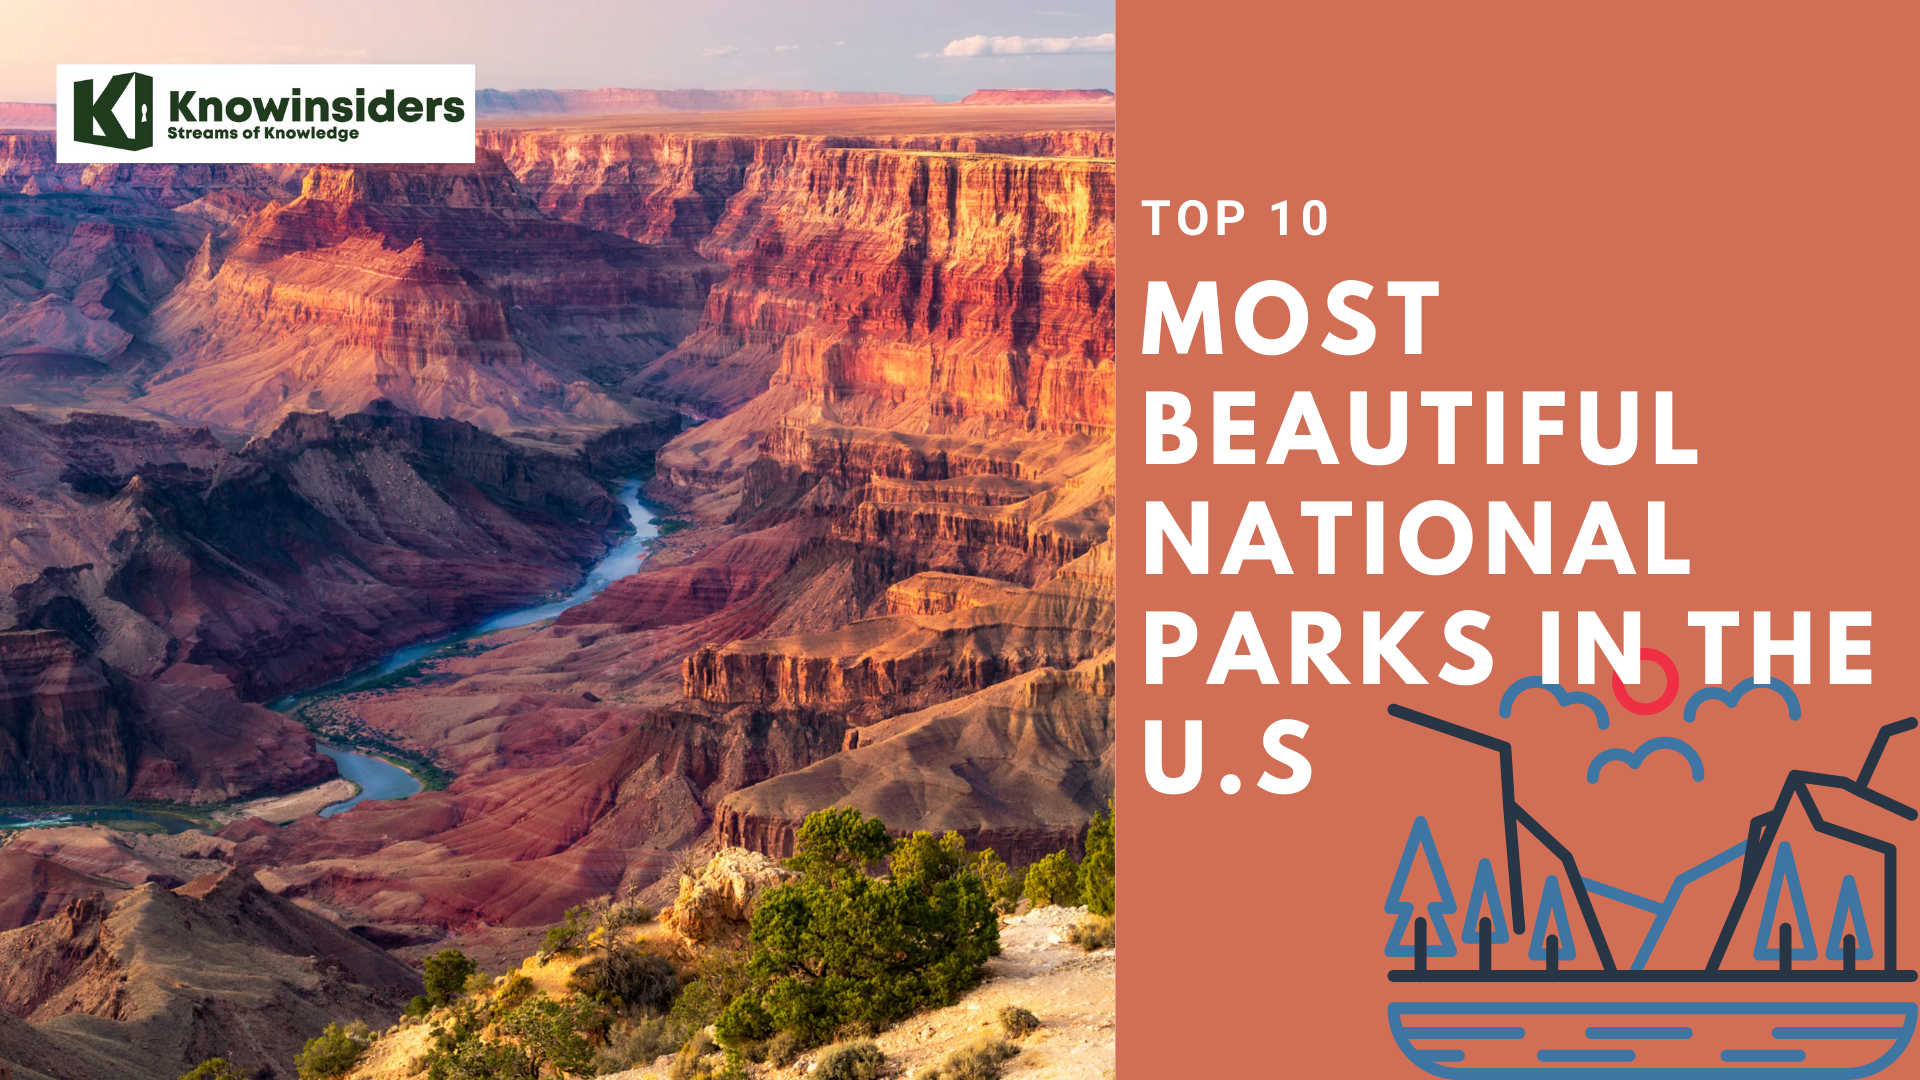 Top 10 Most Beautiful National Parks in the US